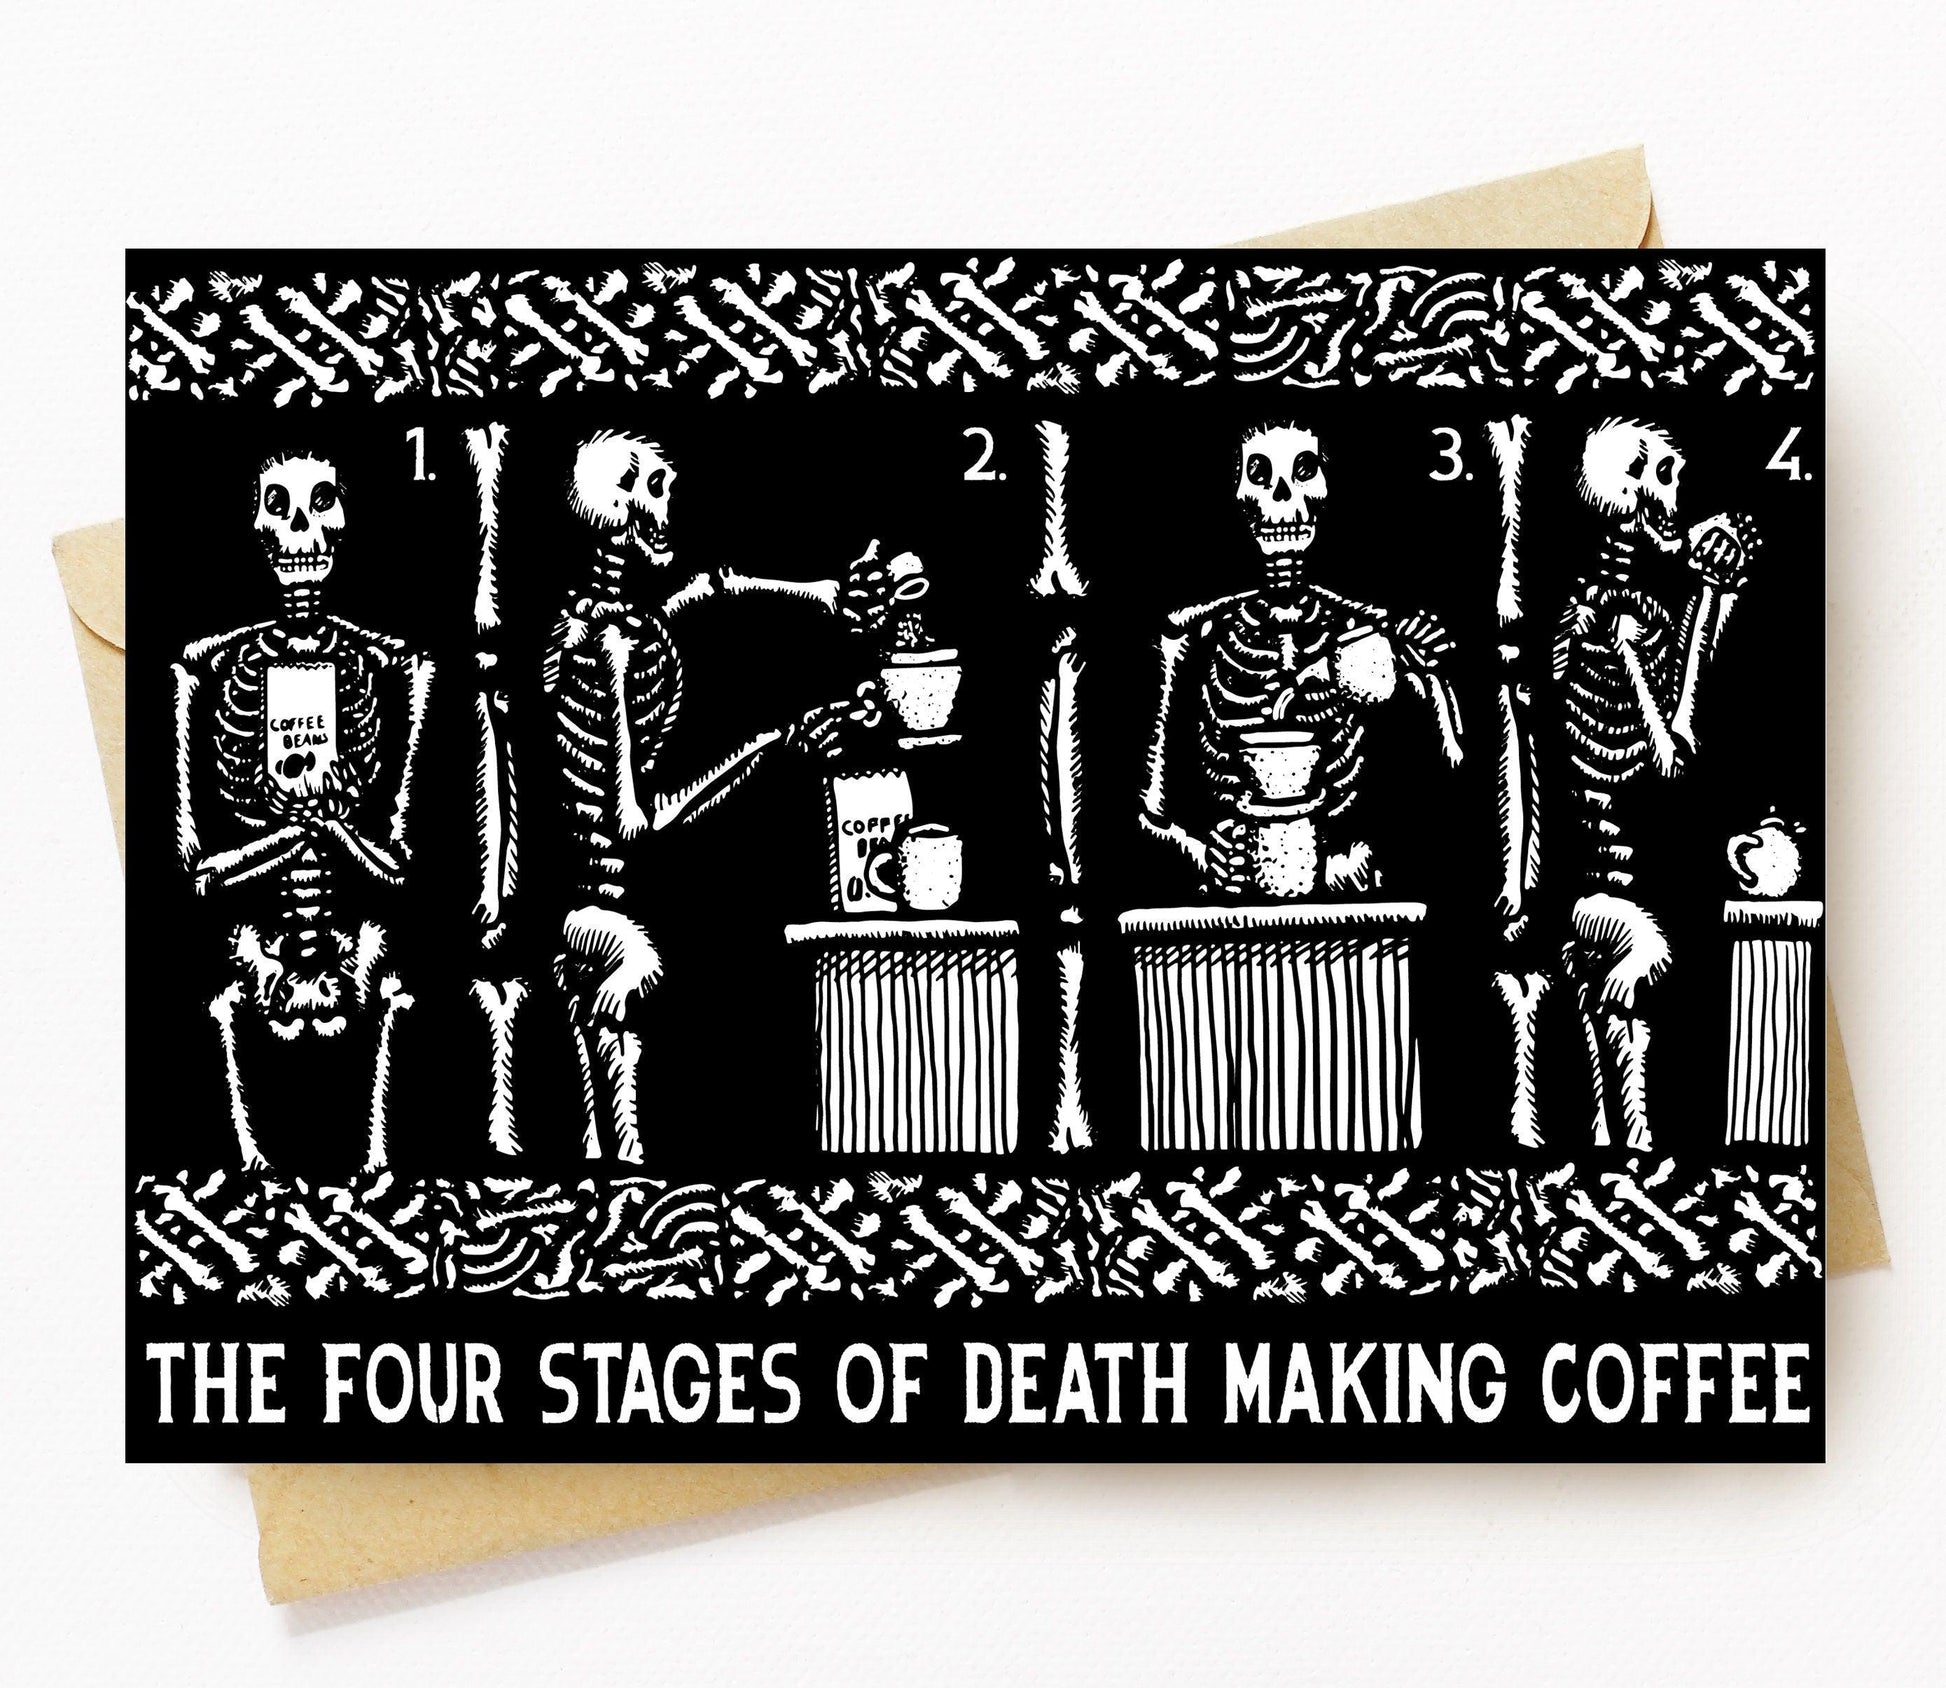 BellavanceInk: Greeting Card With The 4 Stages Of Death Making His Coffee 5 x 7 Inches - BellavanceInk